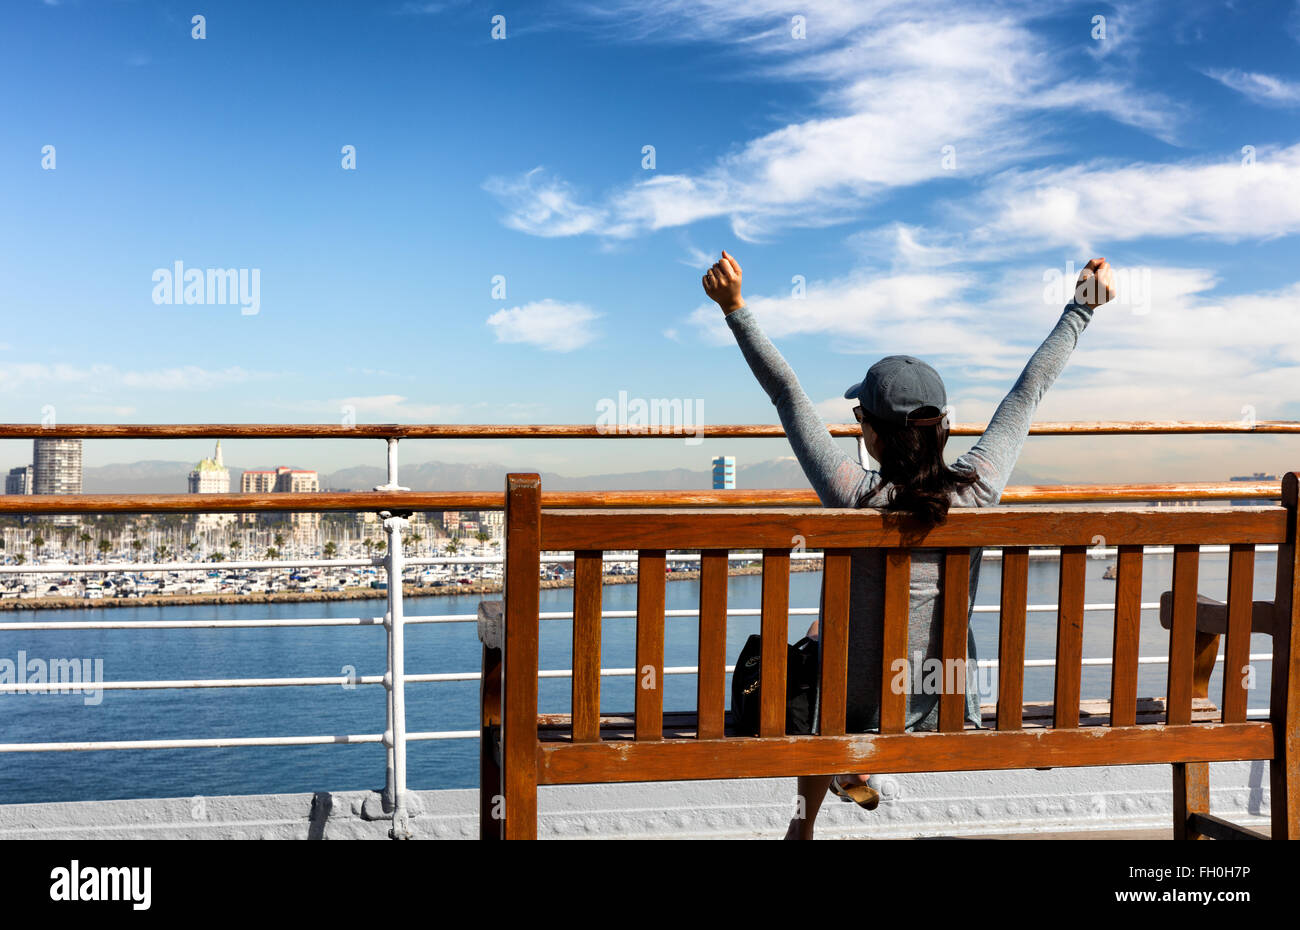 Back view of a woman stretching while sitting on bench and looking out into bay from public walkway. Stock Photo